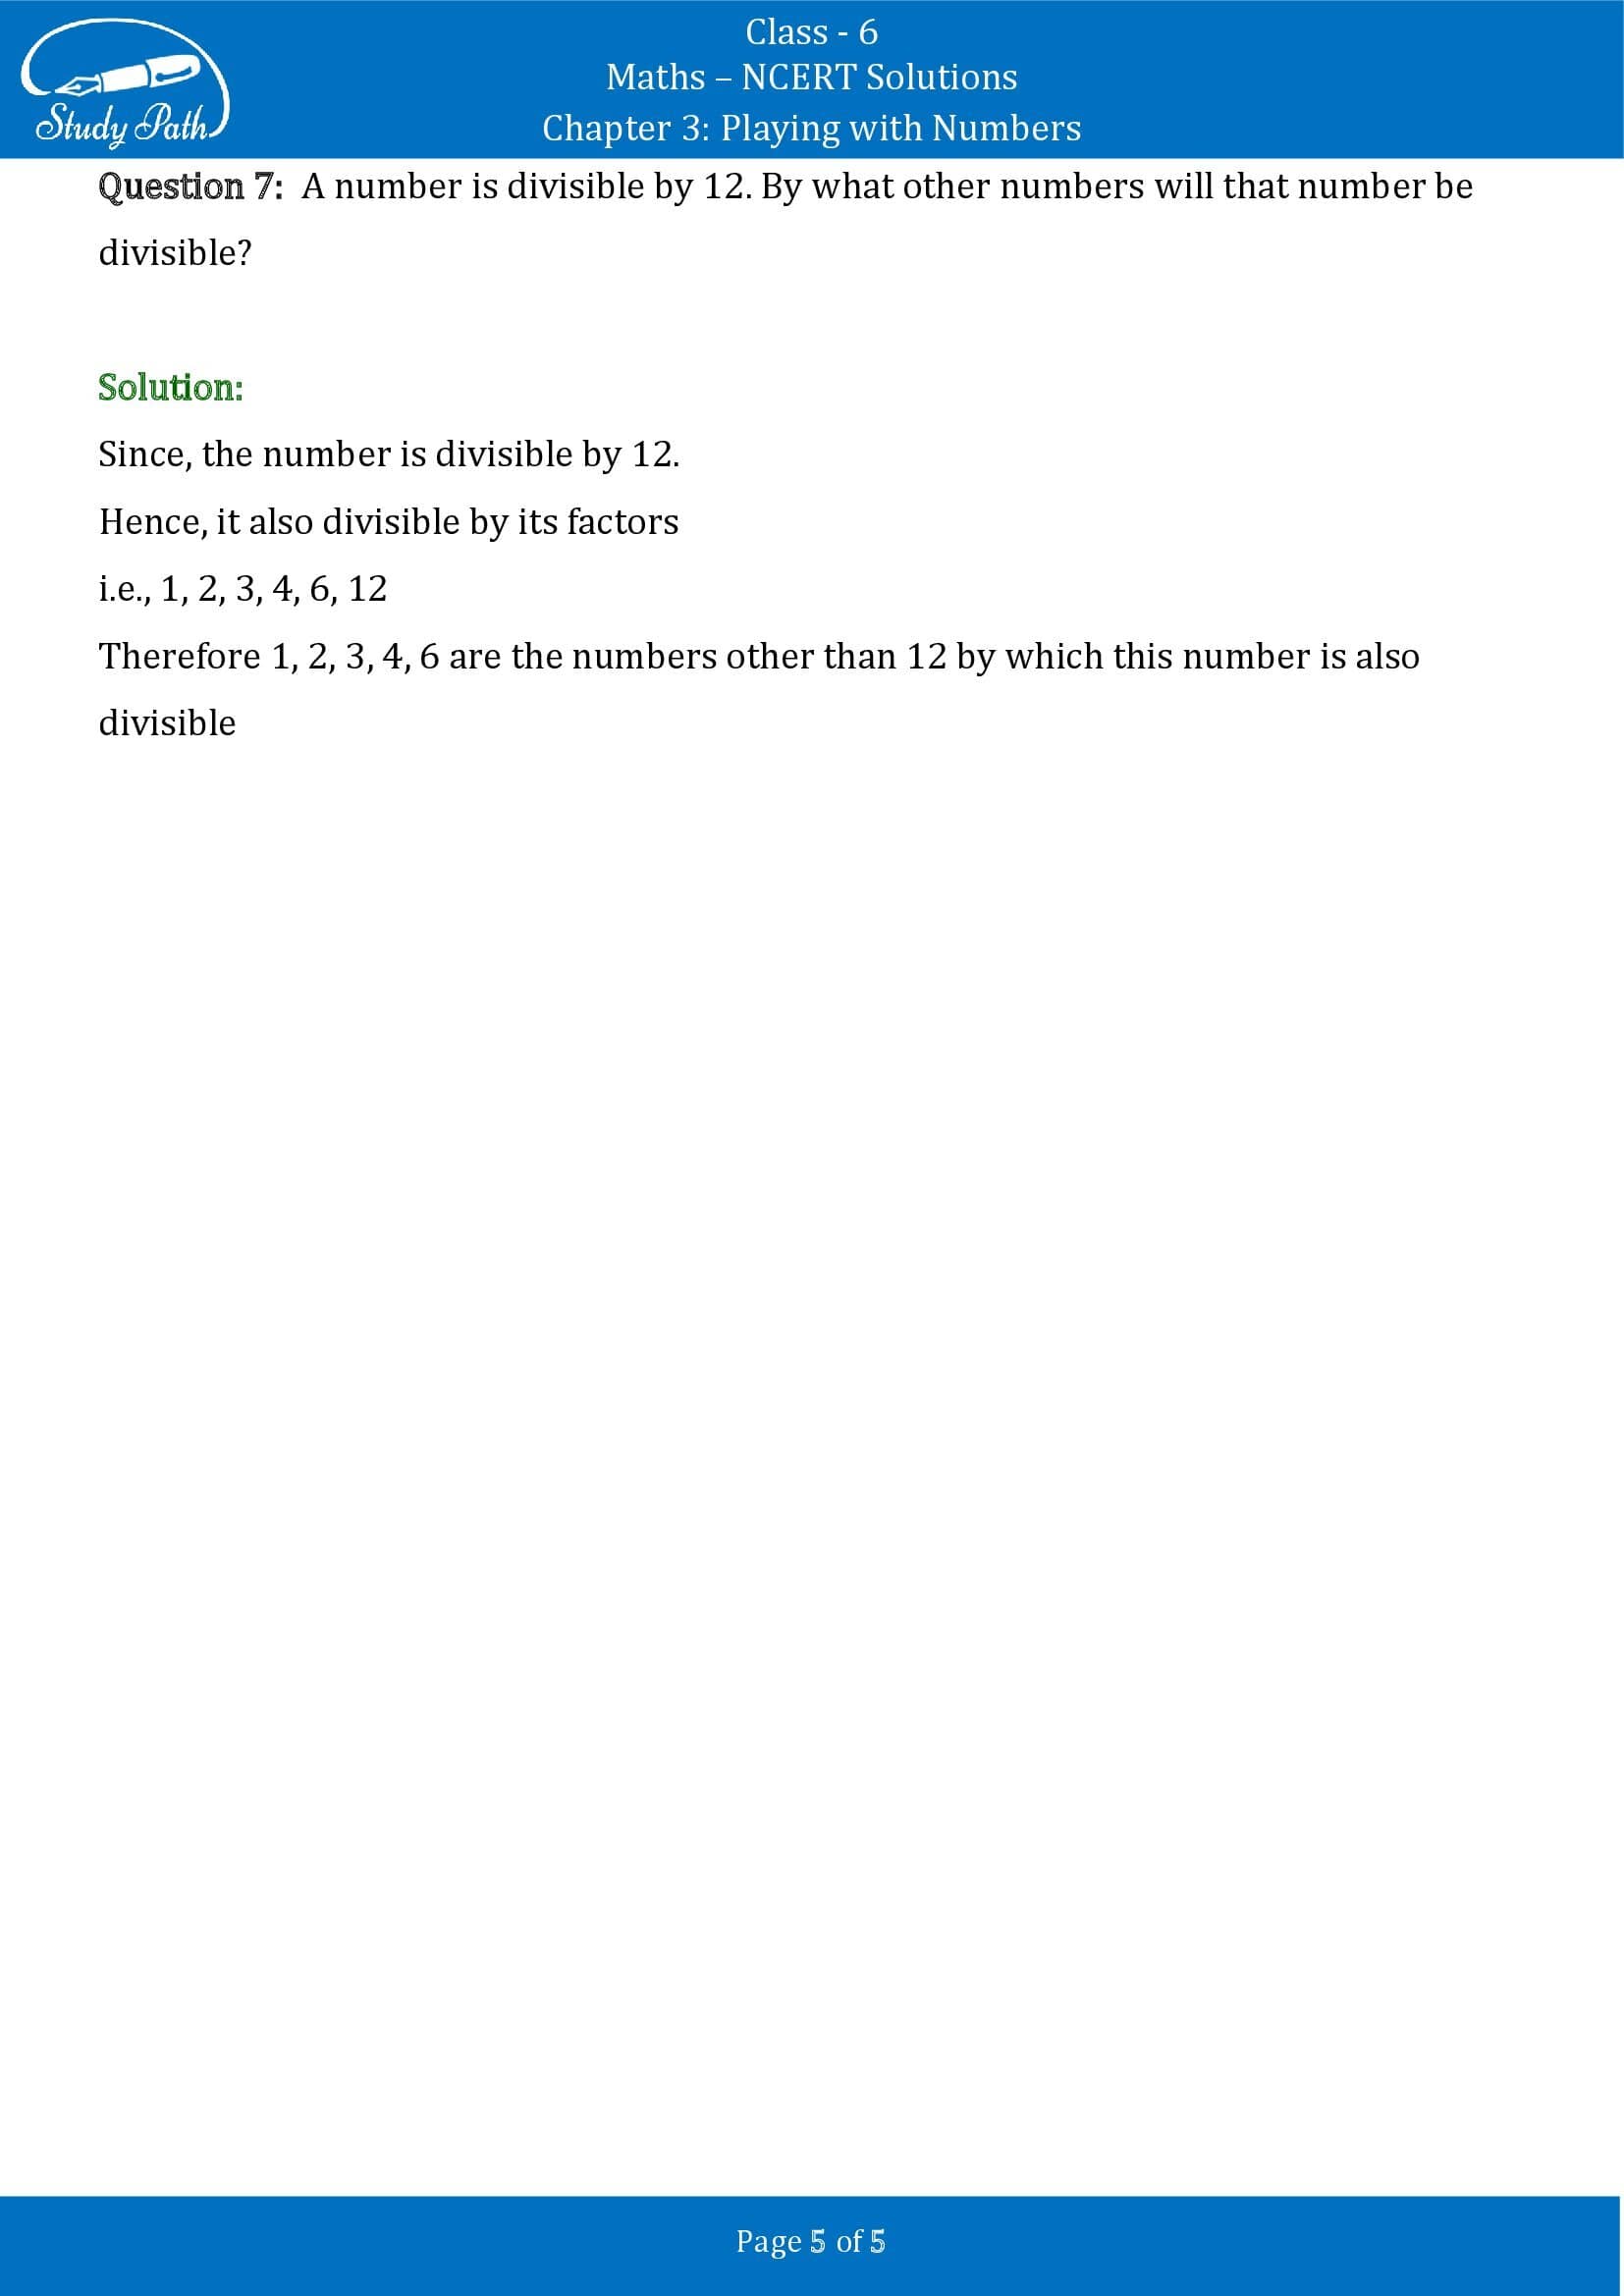 NCERT Solutions for Class 6 Maths Chapter 3 Playing with Numbers Exercise 3.4 00005